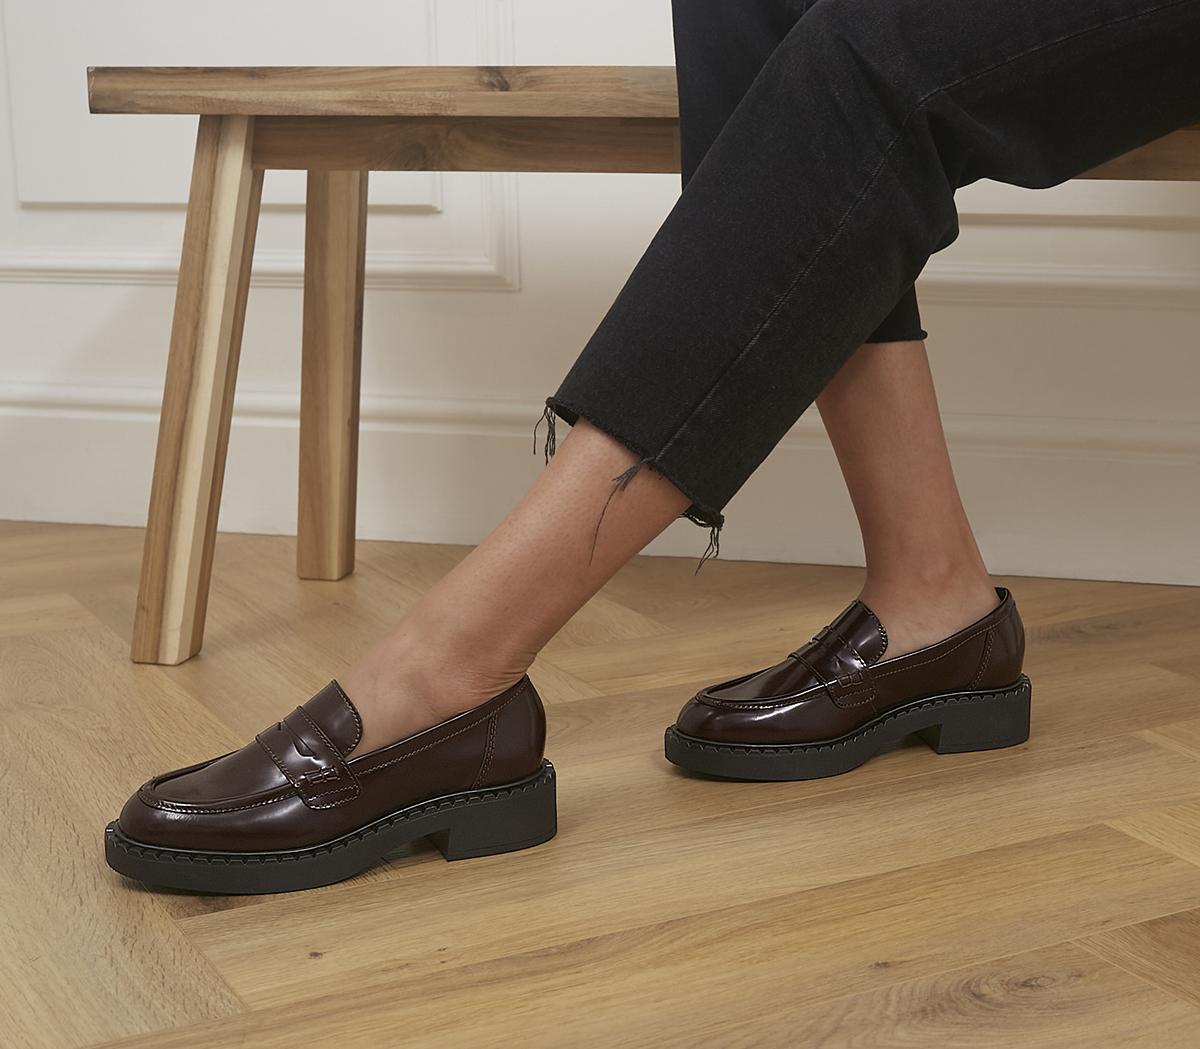 OfficeFavour Chunky Sole LoafersDark Burgundy Box Leather